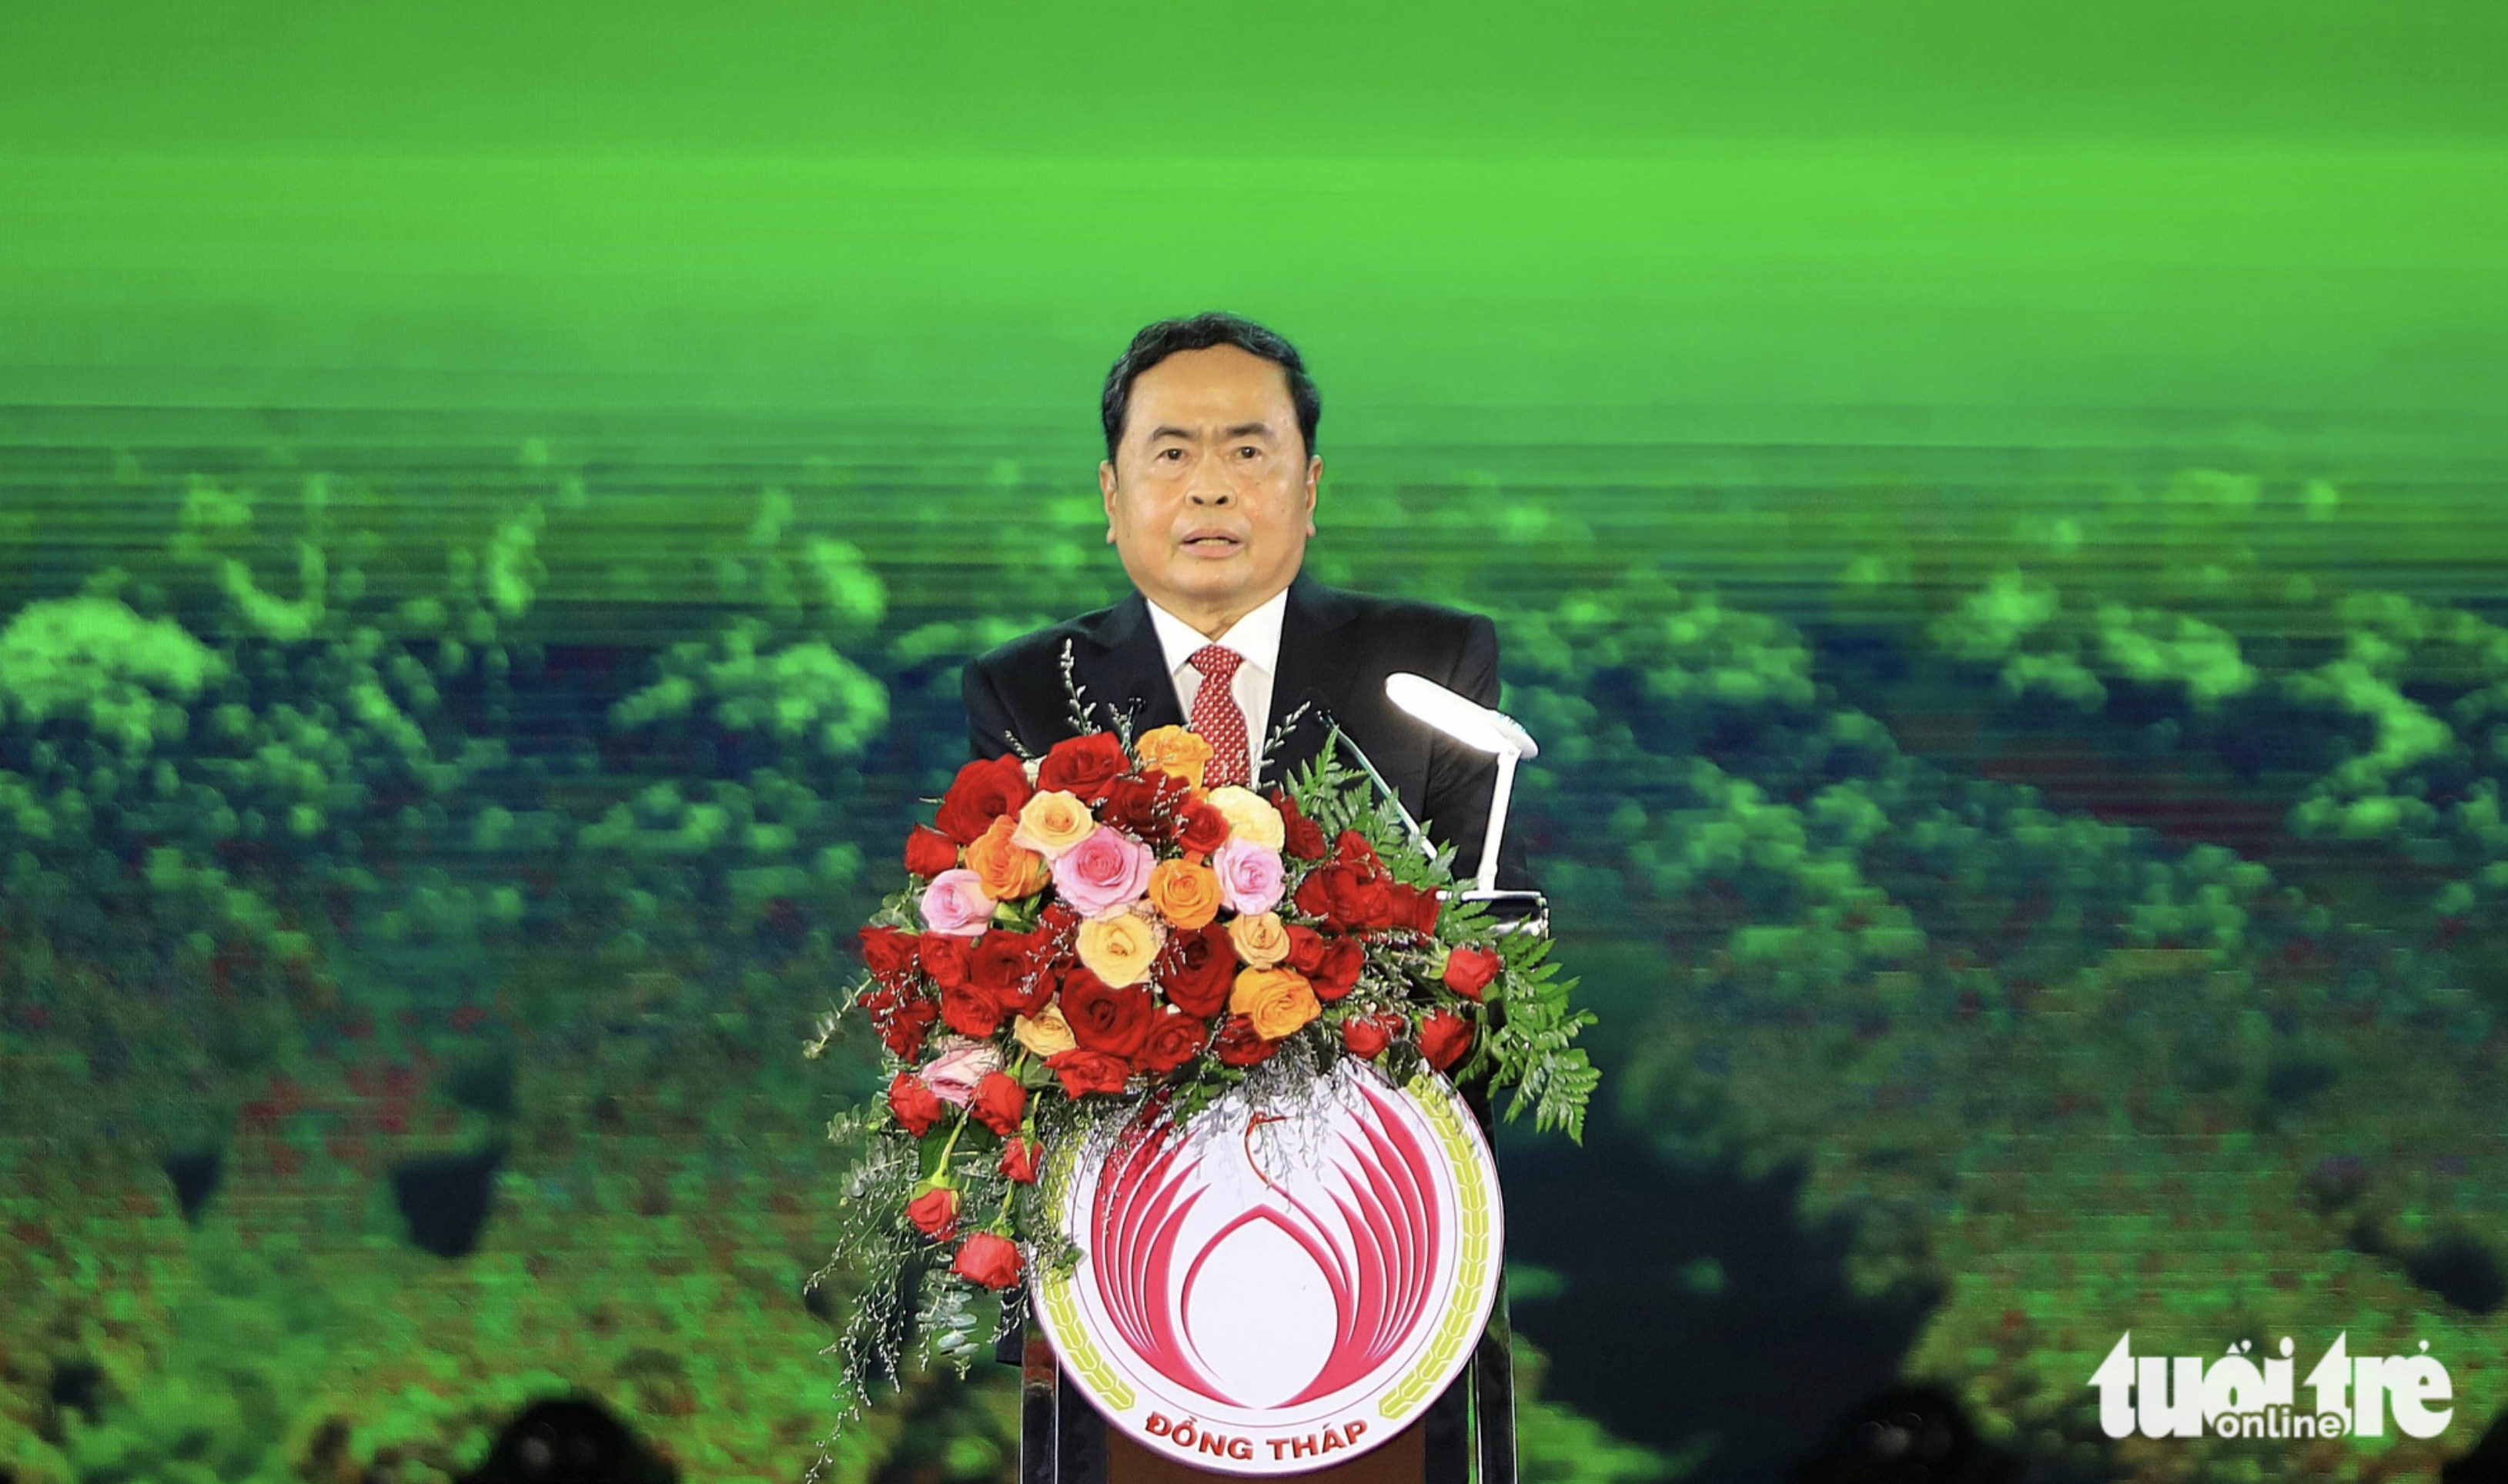 Tran Thanh Man, permanent vice chairman of Vietnam’s lawmaking National Assembly, speaks at the opening ceremony of the Sa Dec ornamental flower festival in Dong Thap Province, southern Vietnam. Photo: Dang Tuyet / Tuoi Tre